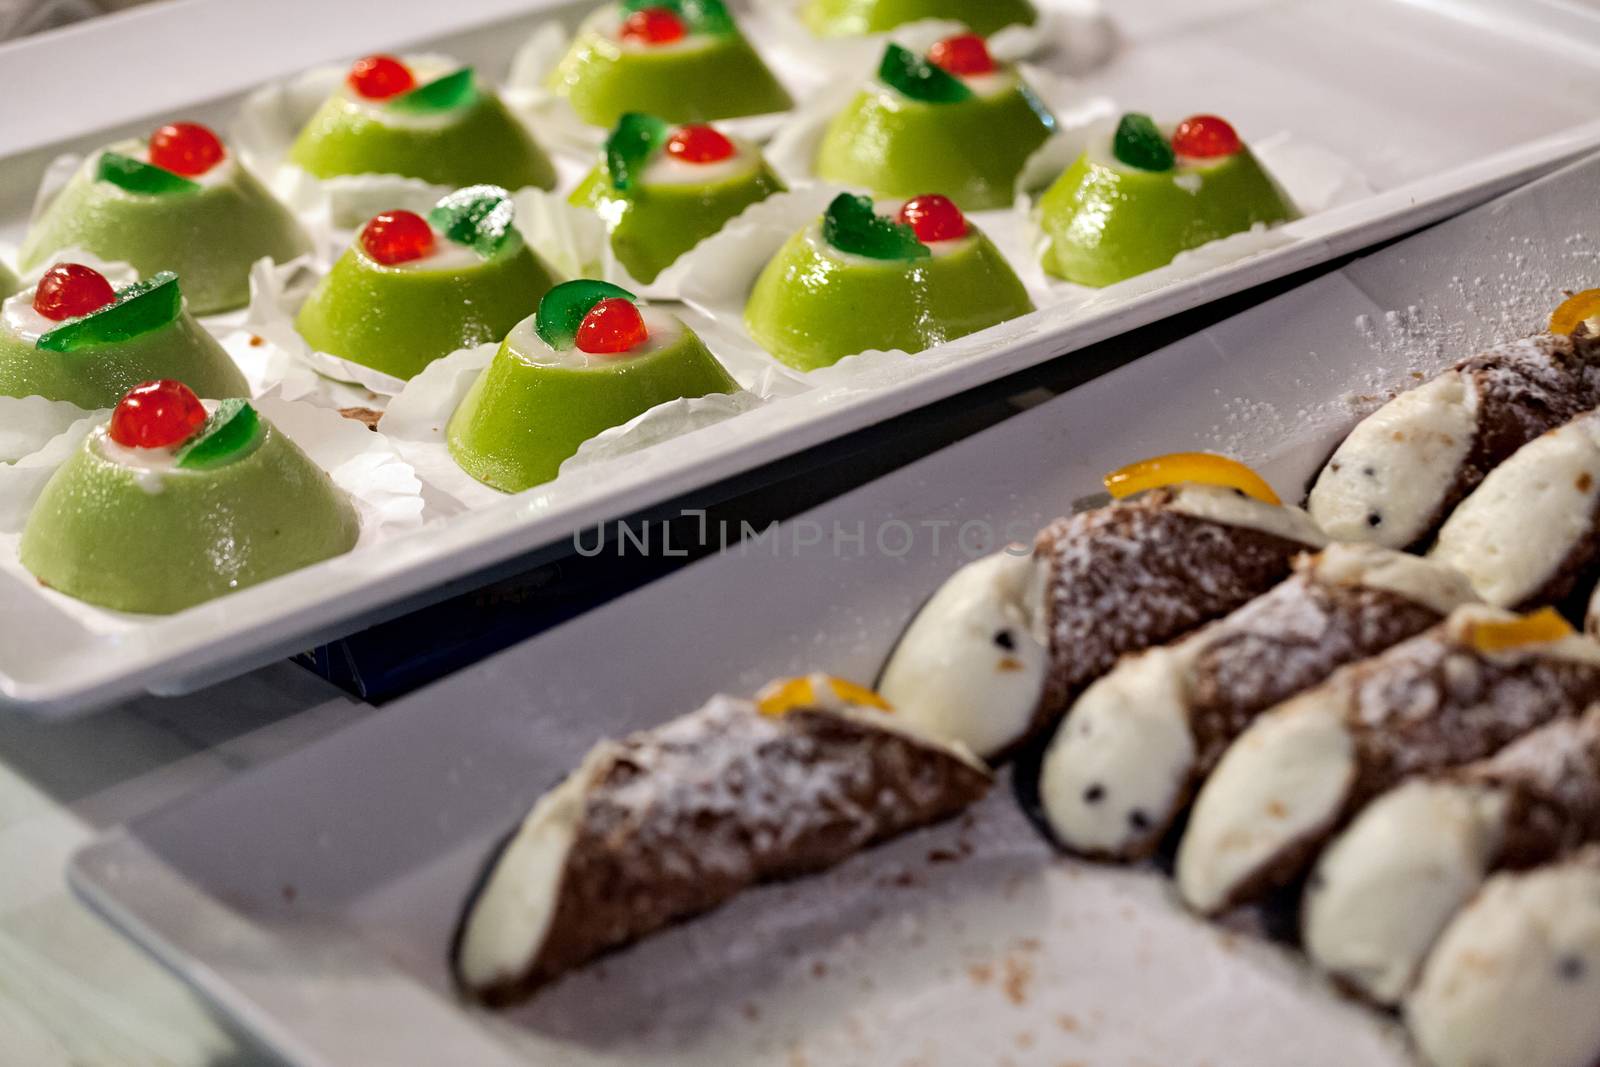 Sicilian cassata and cannoli, a traditional sweet from Sicily, Italy